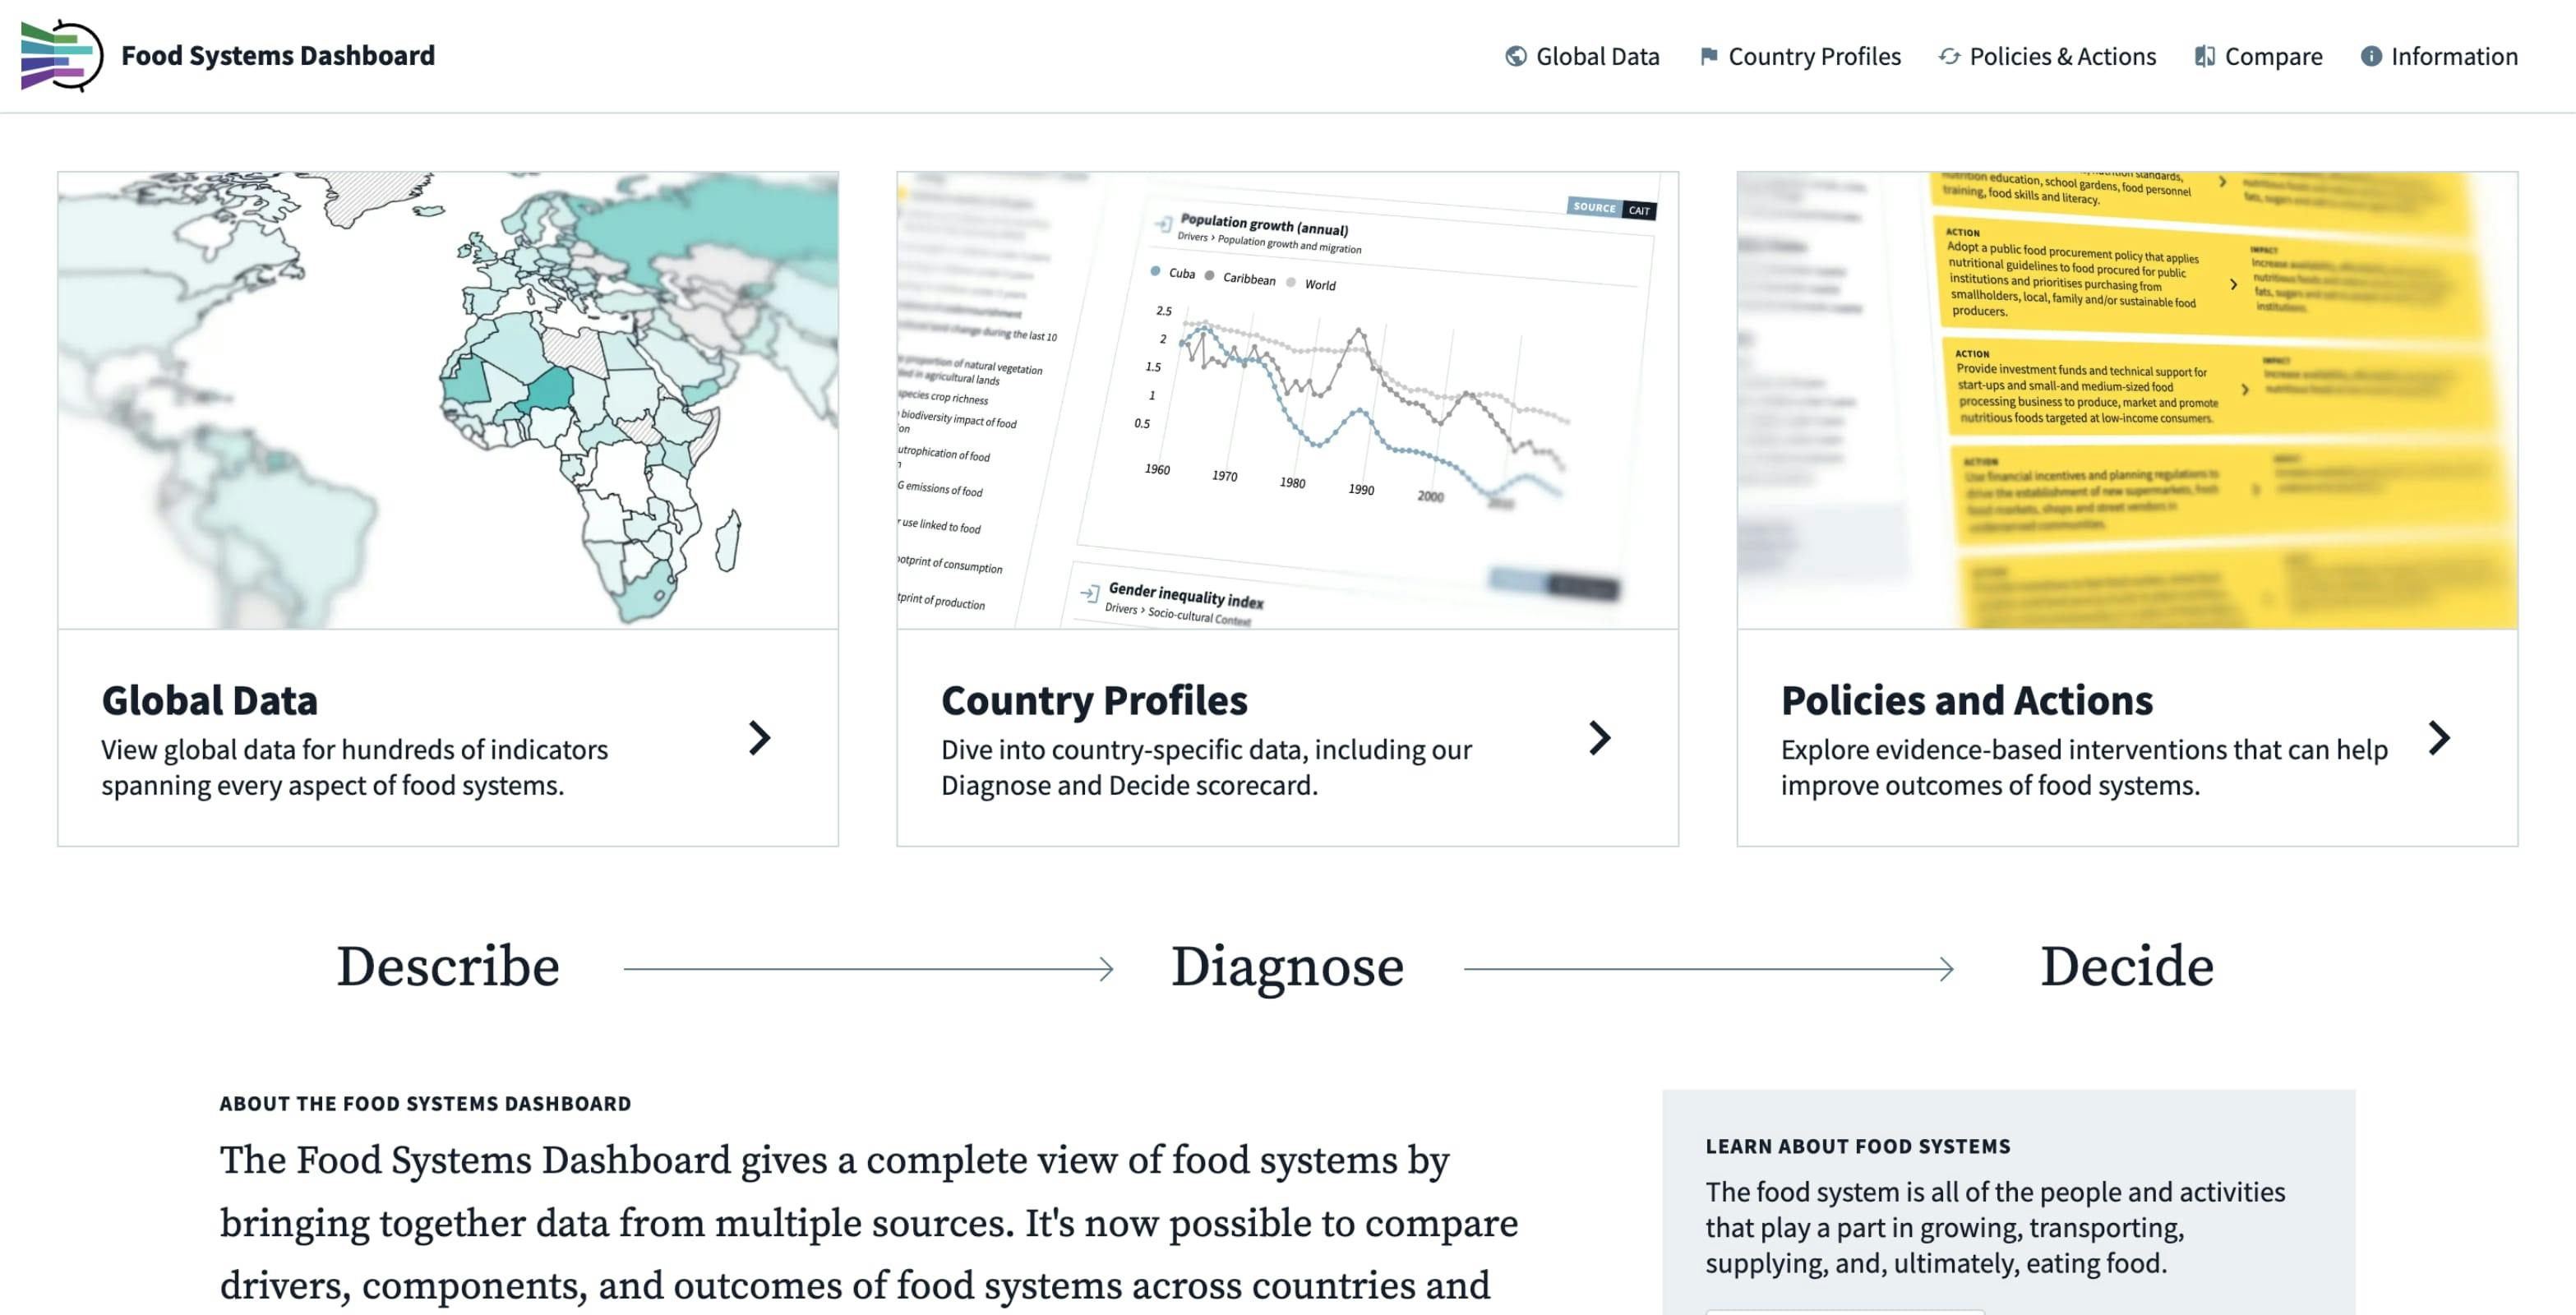 About the Food Systems Dashboard